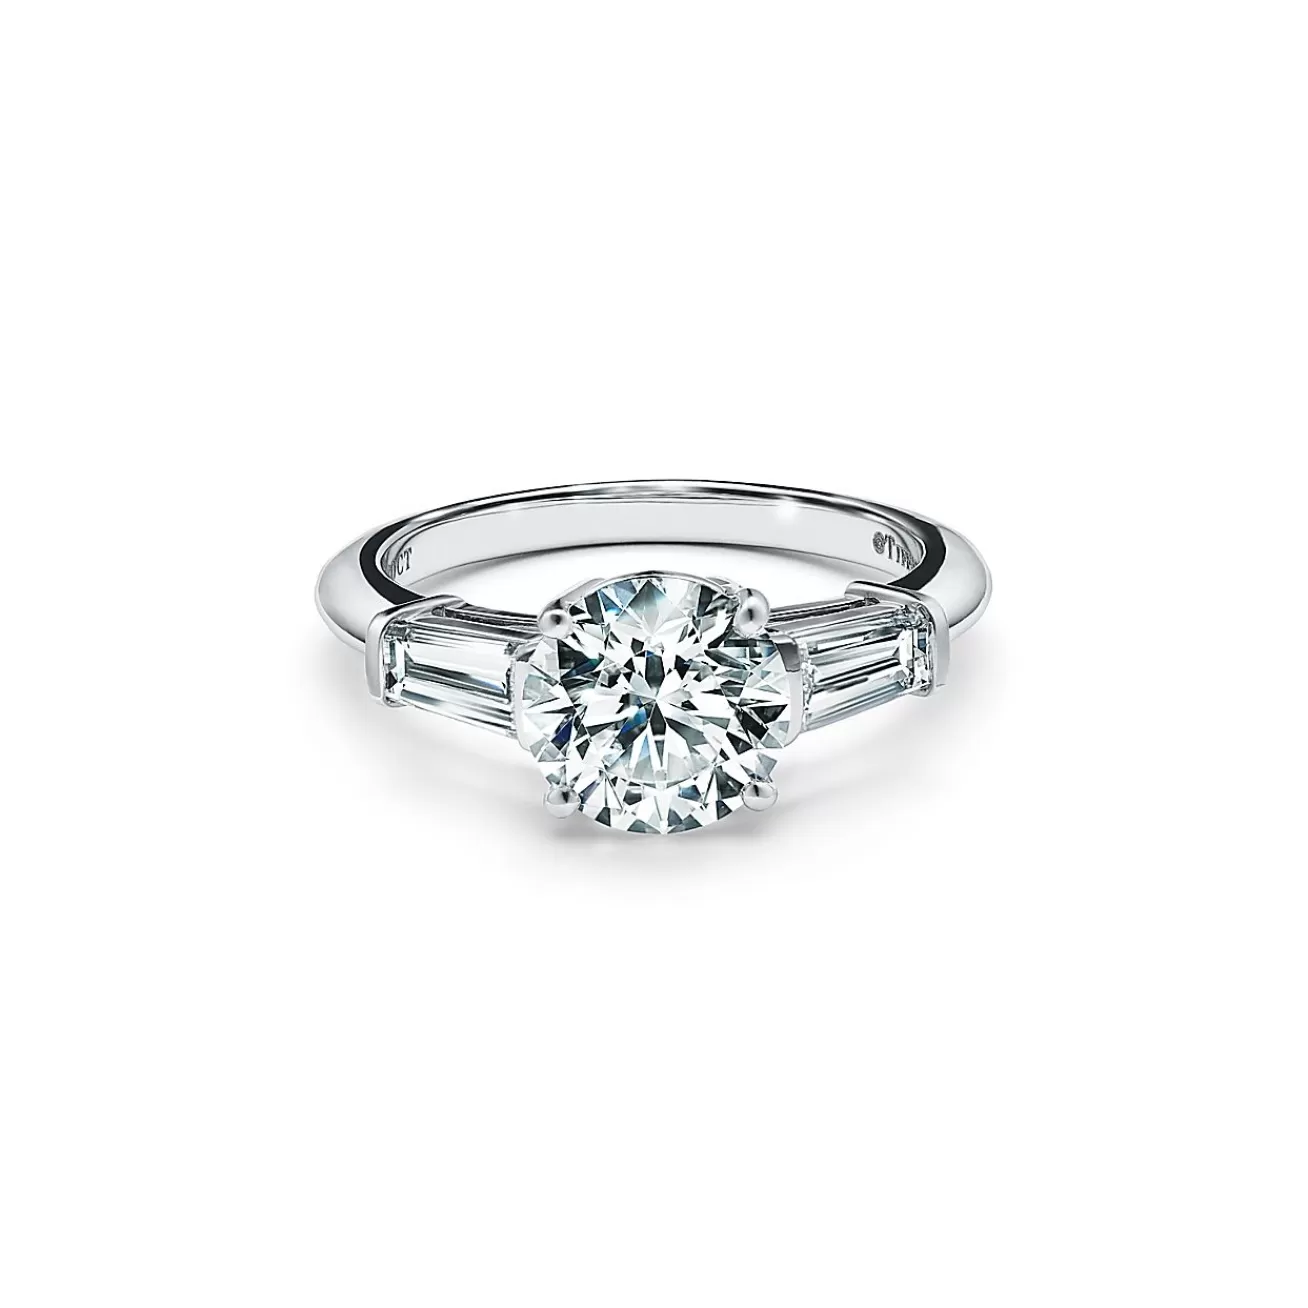 Tiffany & Co. Tiffany Three Stone engagement ring with baguette side stones in platinum. | ^ Engagement Rings